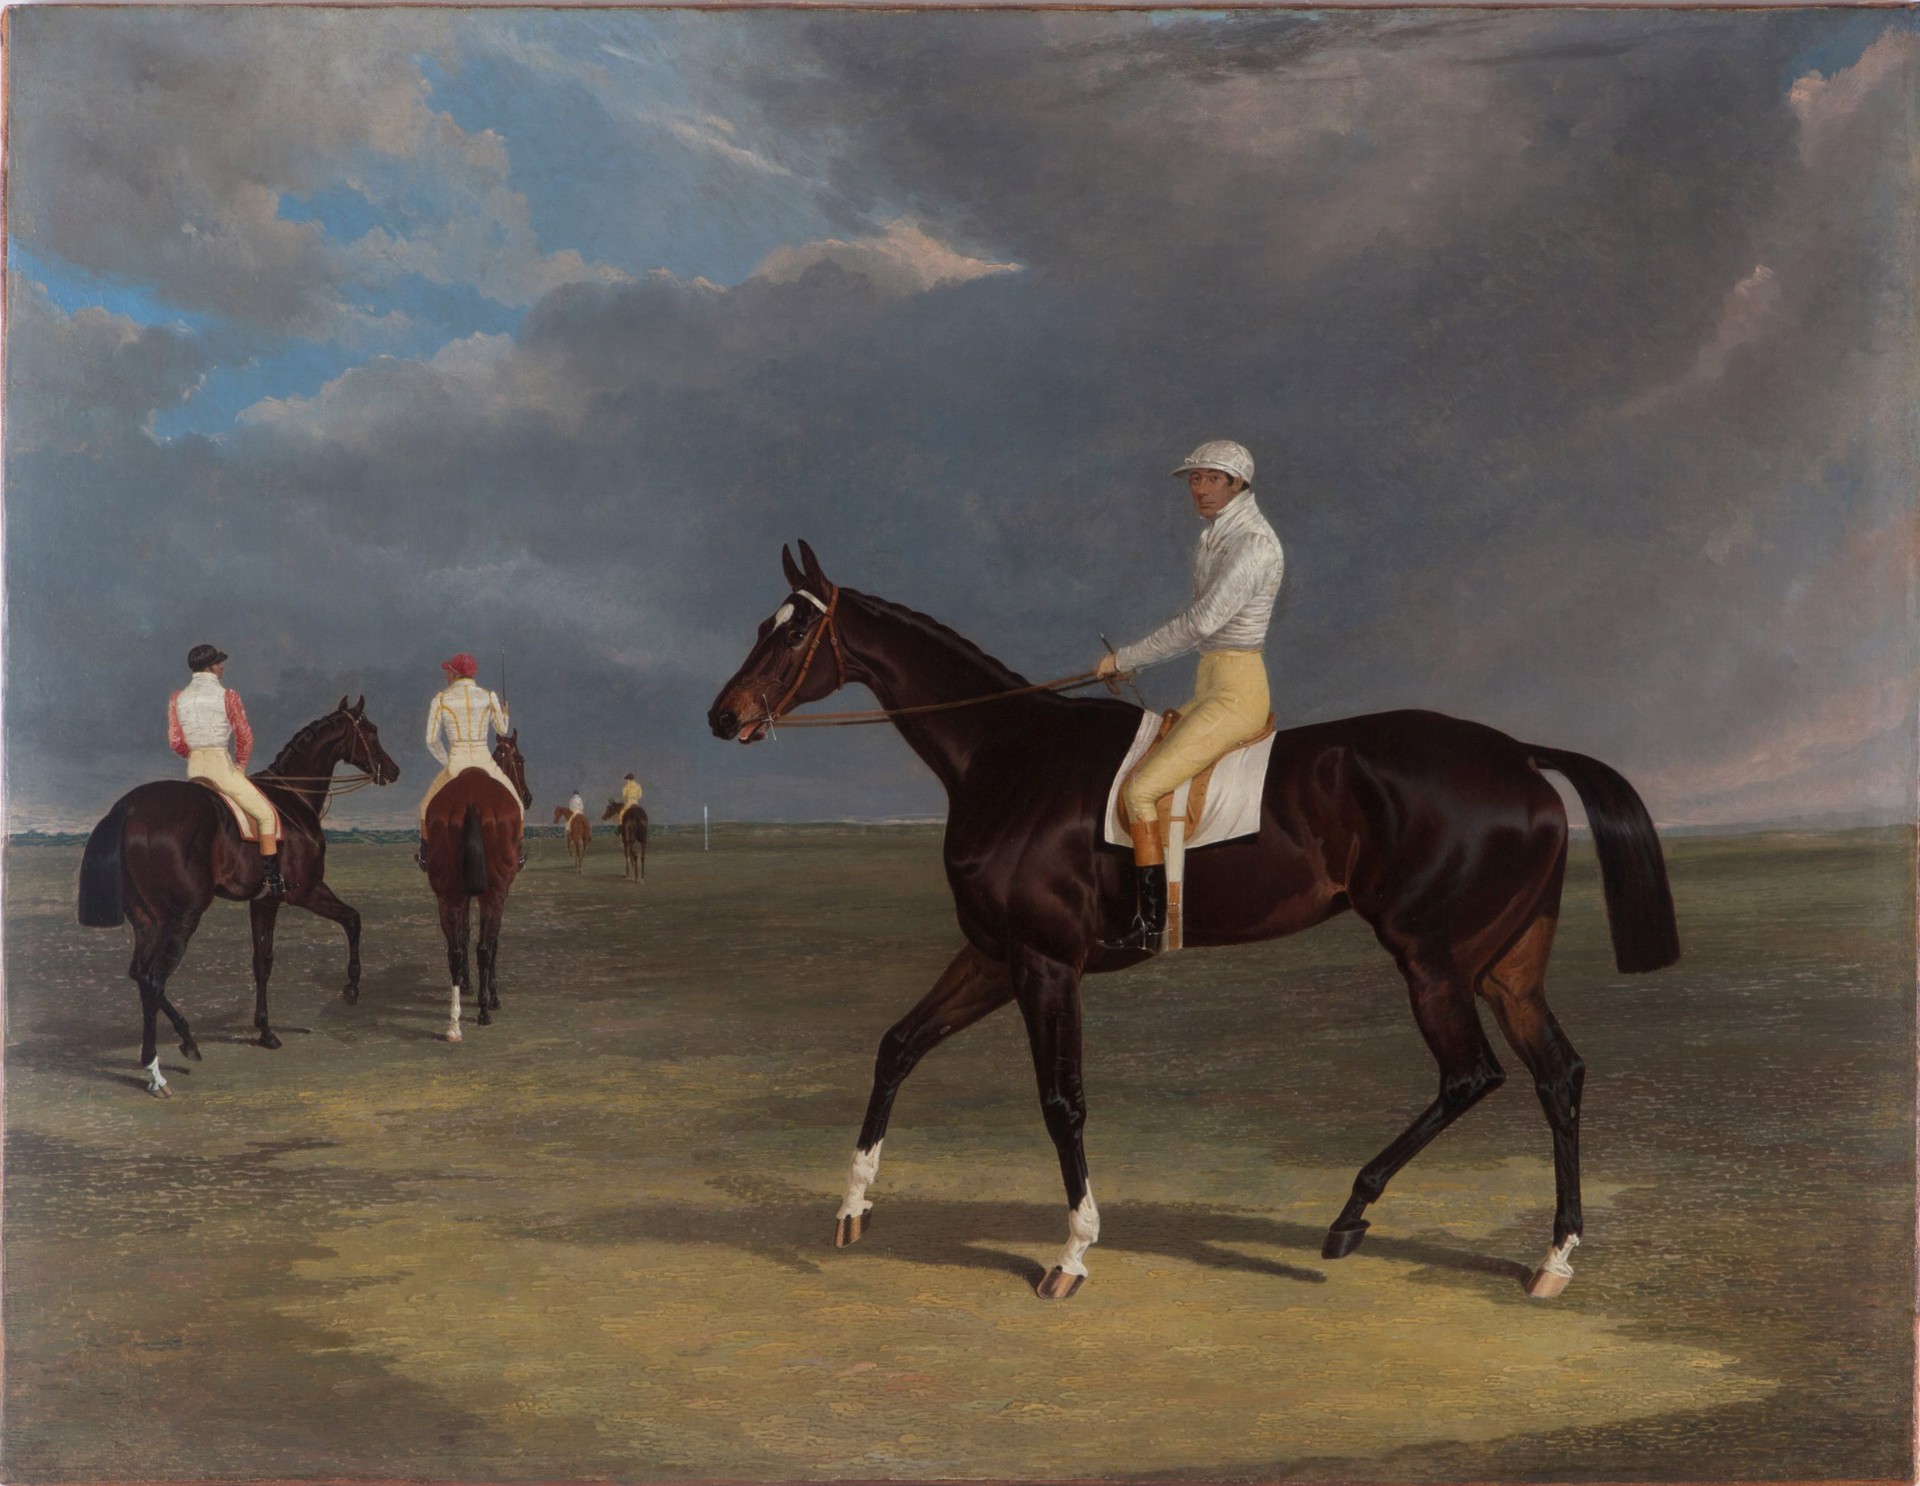 Lucetta, Sir Mark Wood's Brown Filly before the Start by John Frederick Herring, Sr.